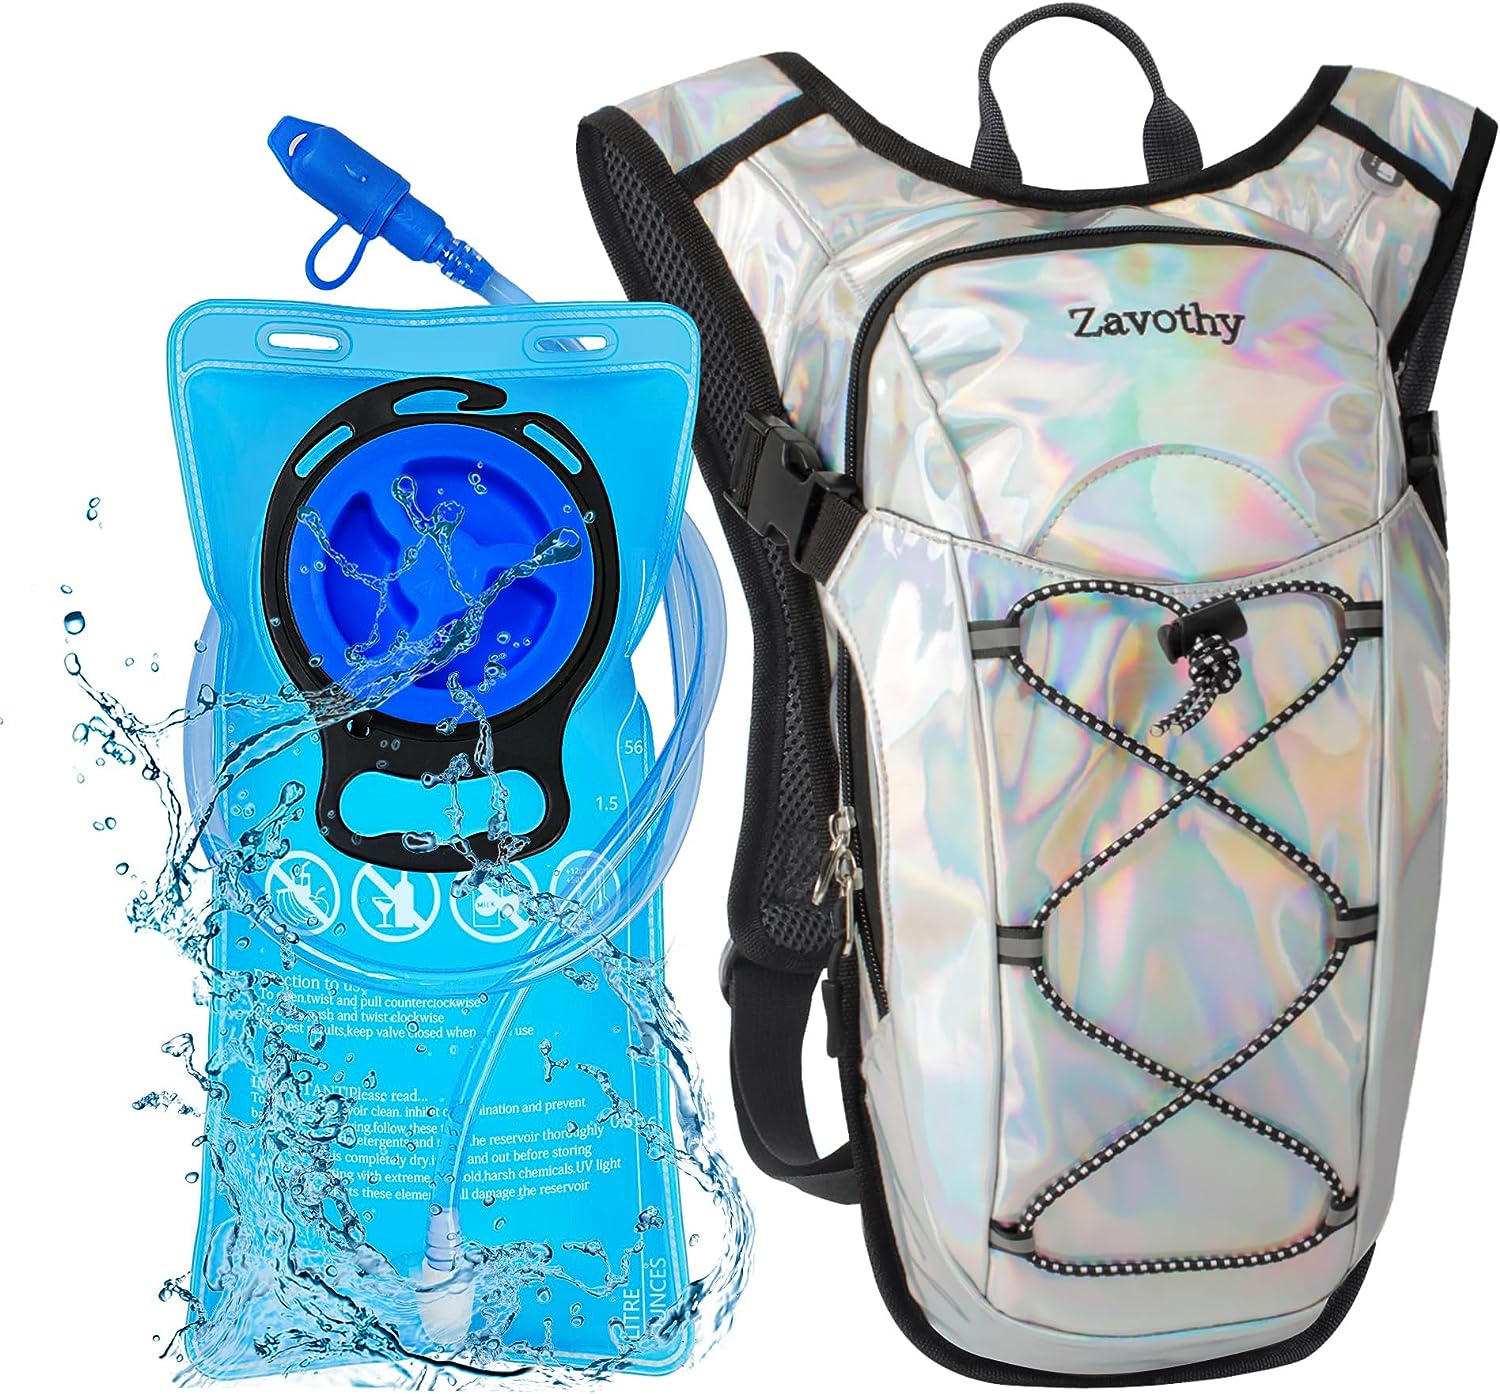 Zavothy Rave Hydration Backpack Review